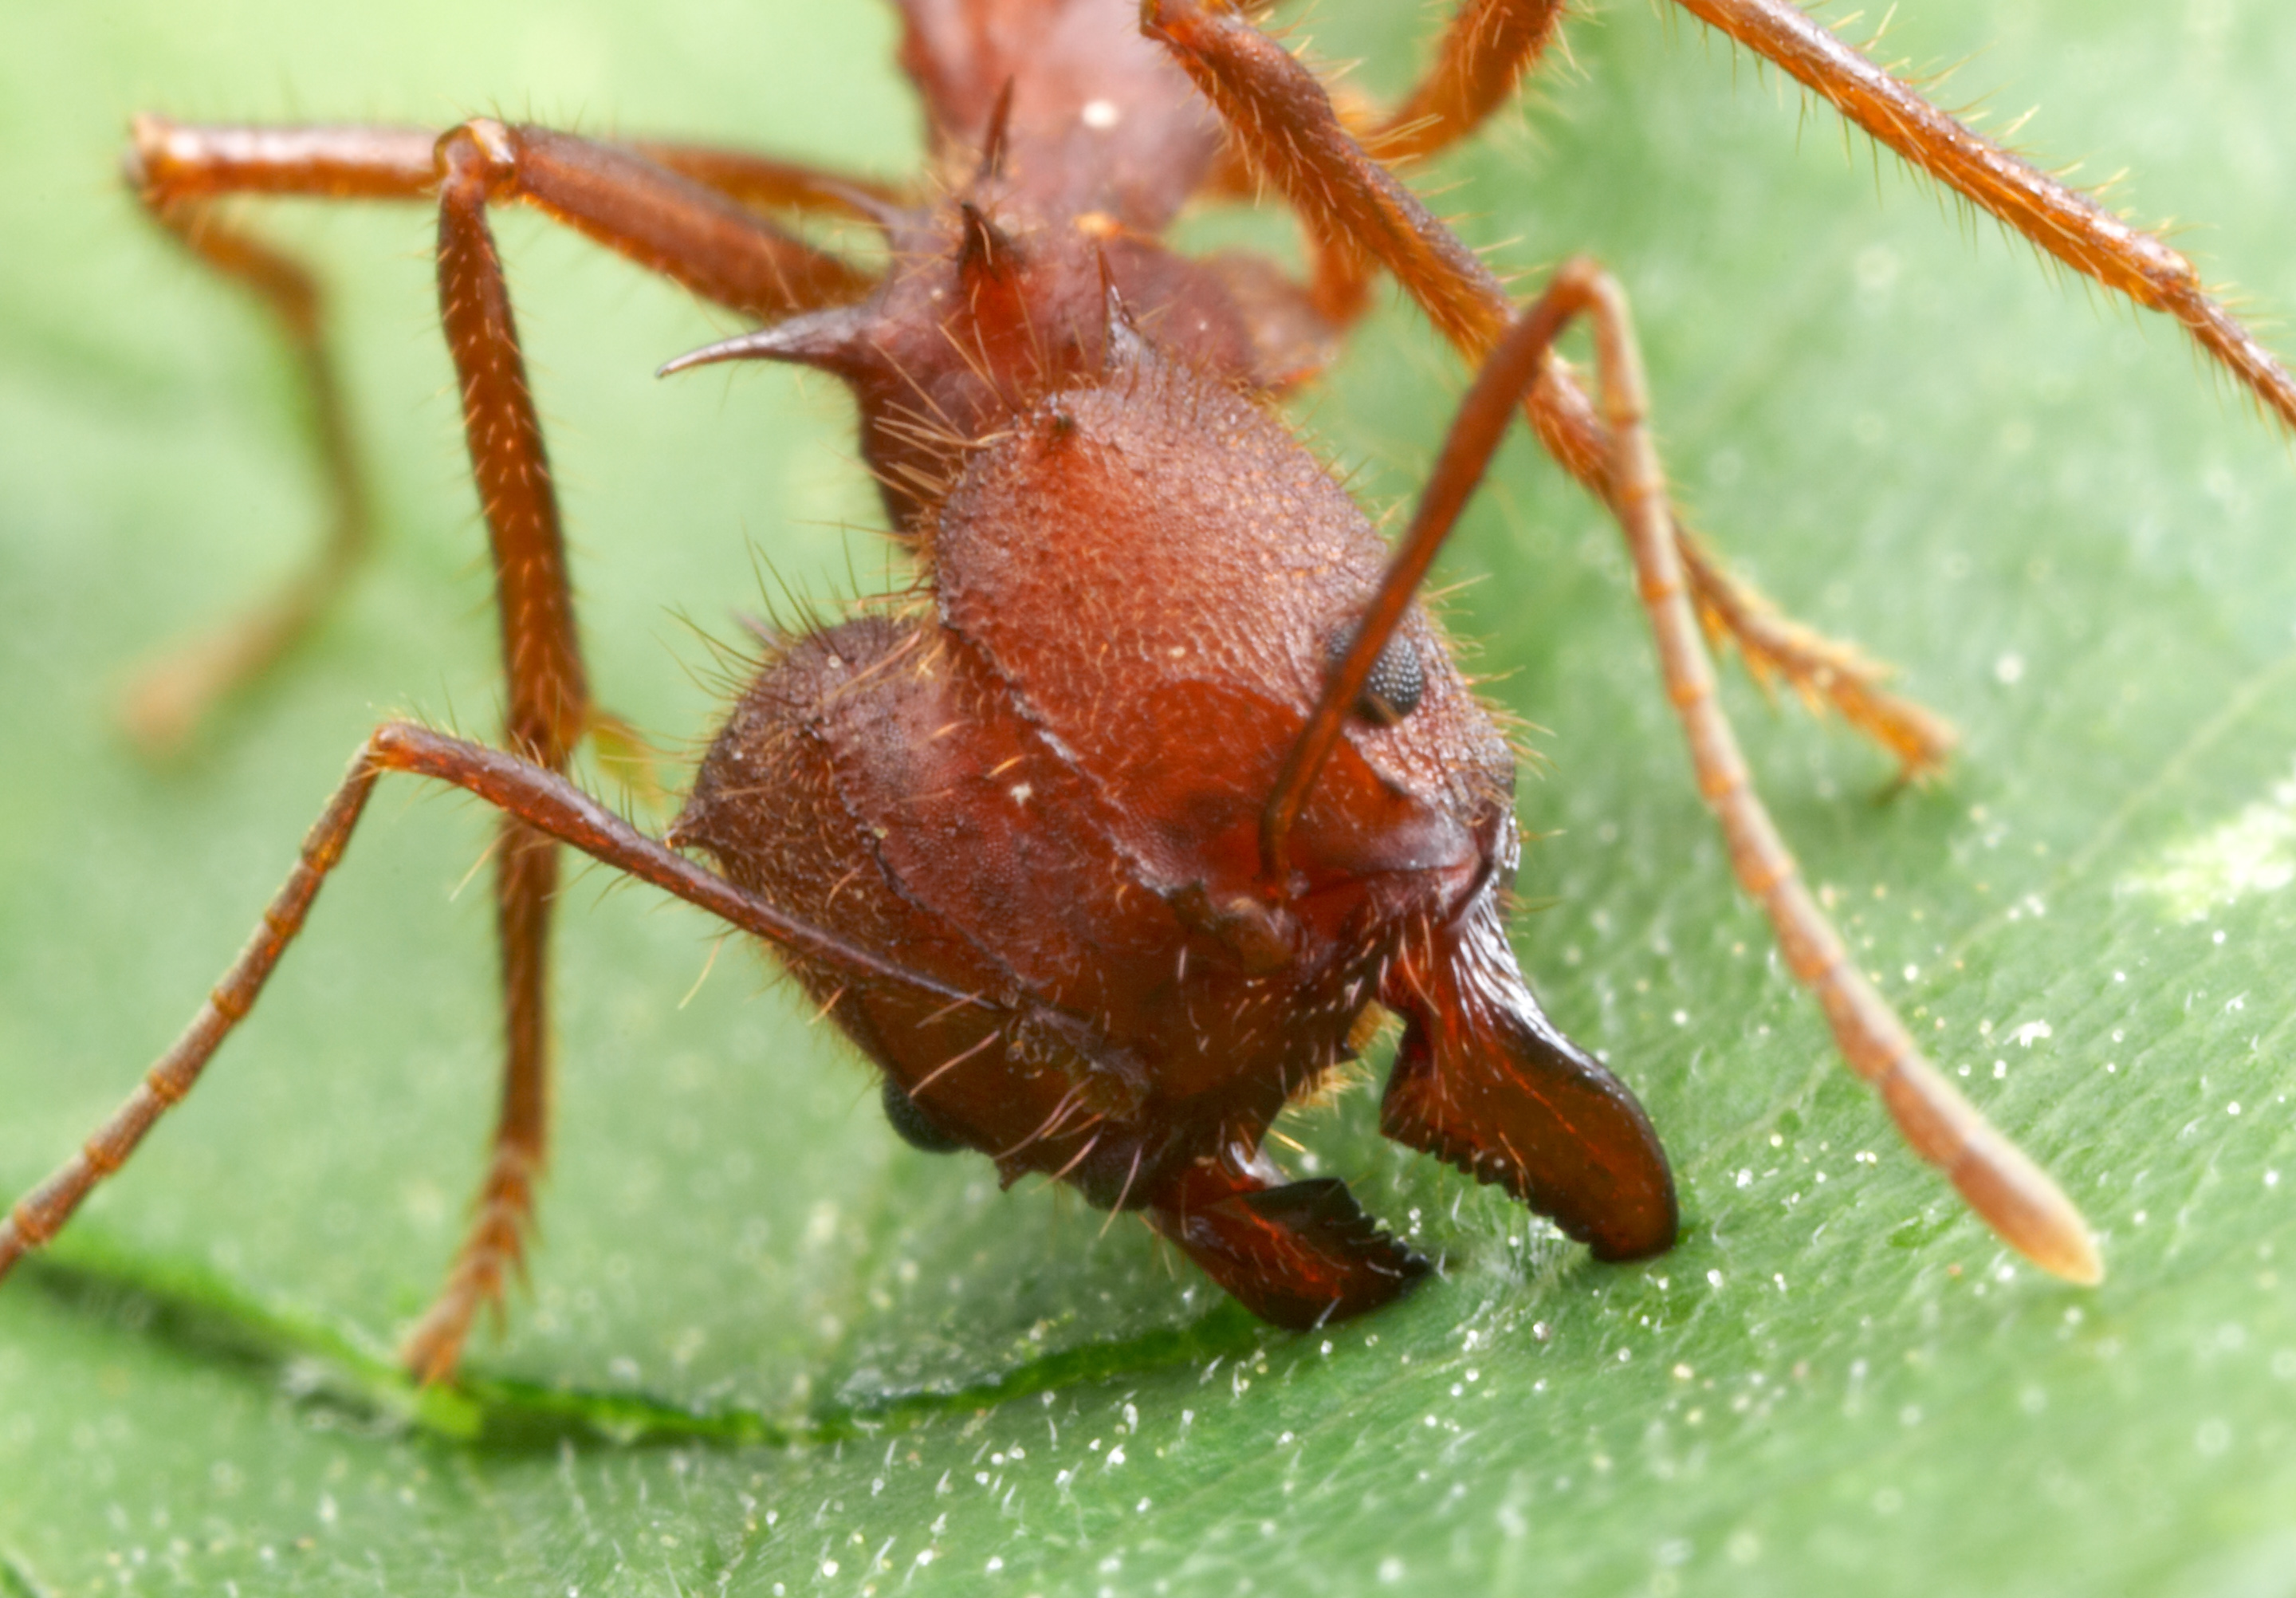 Photo of a leafcutter ant, eating a leaf, by Alex Wild, used by permission